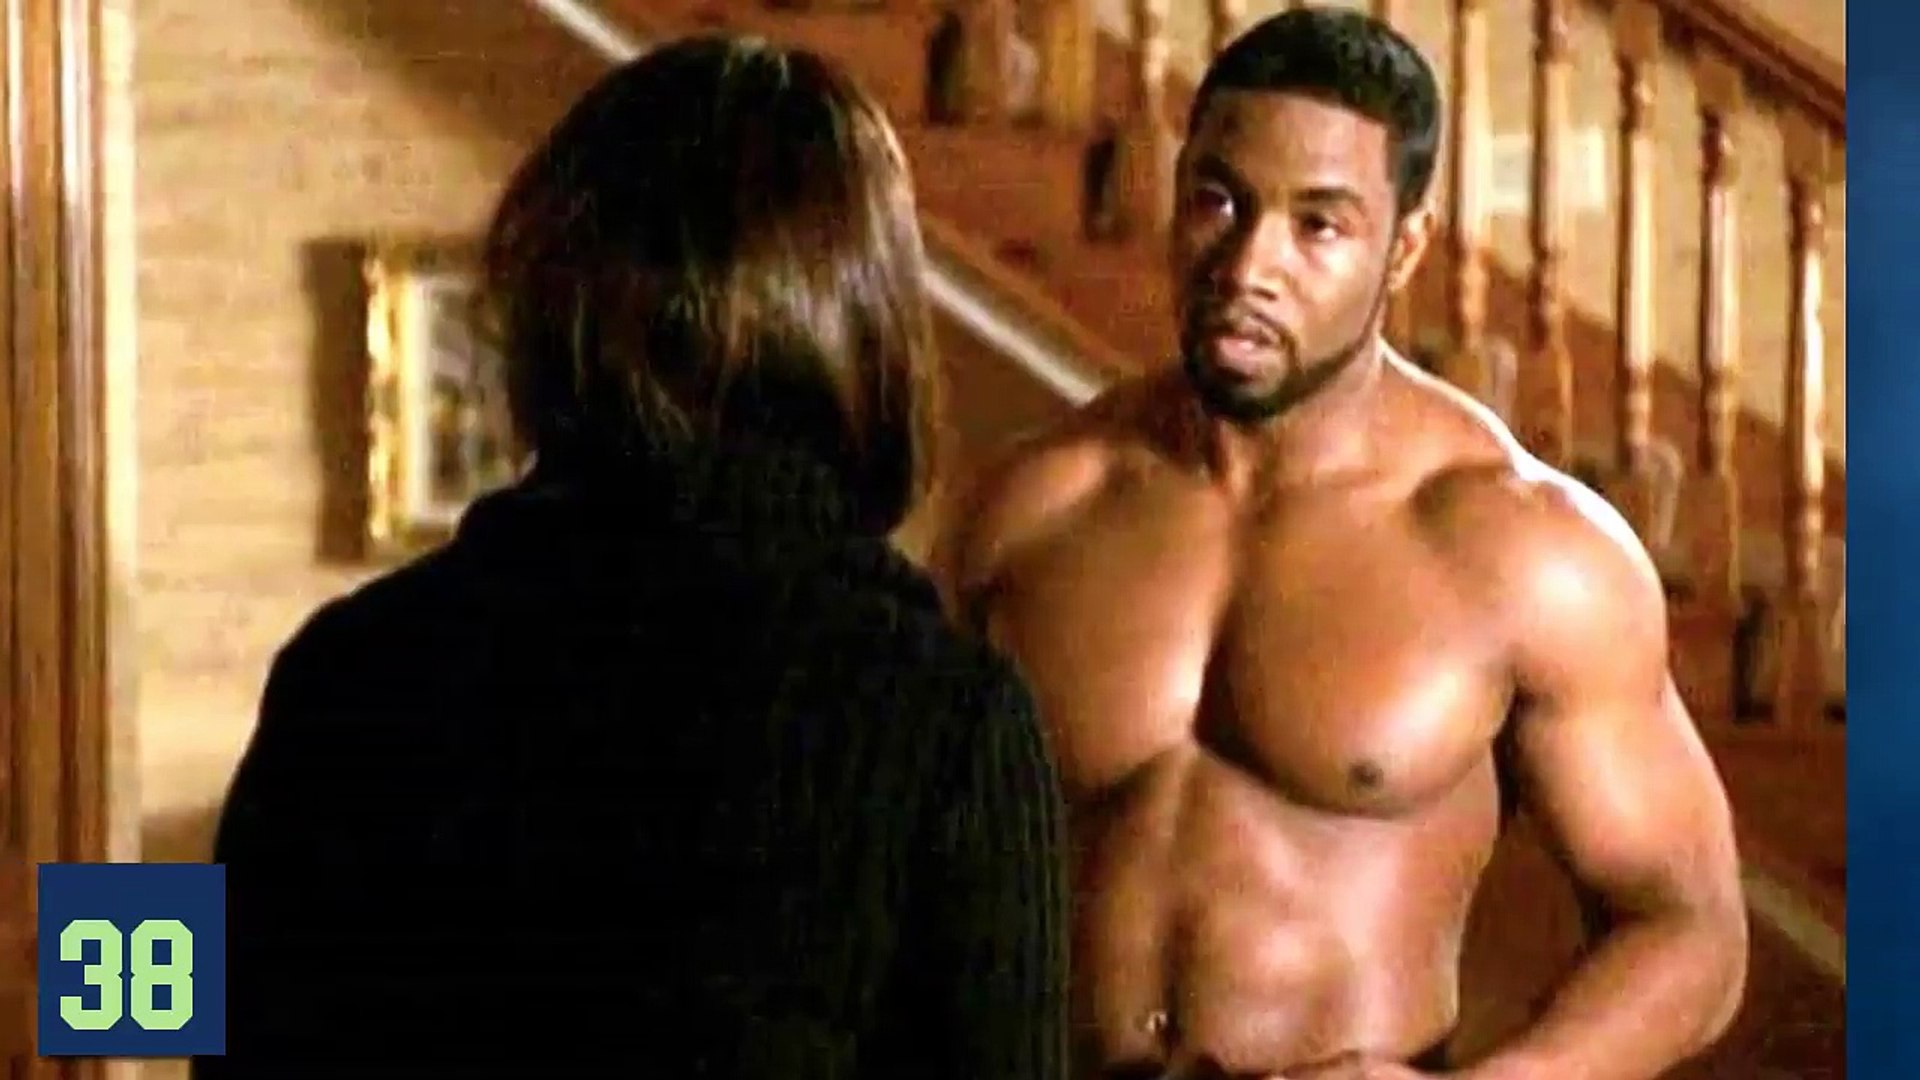 Michael Jai White From 6 to 50 Years Old - video dailymotion.